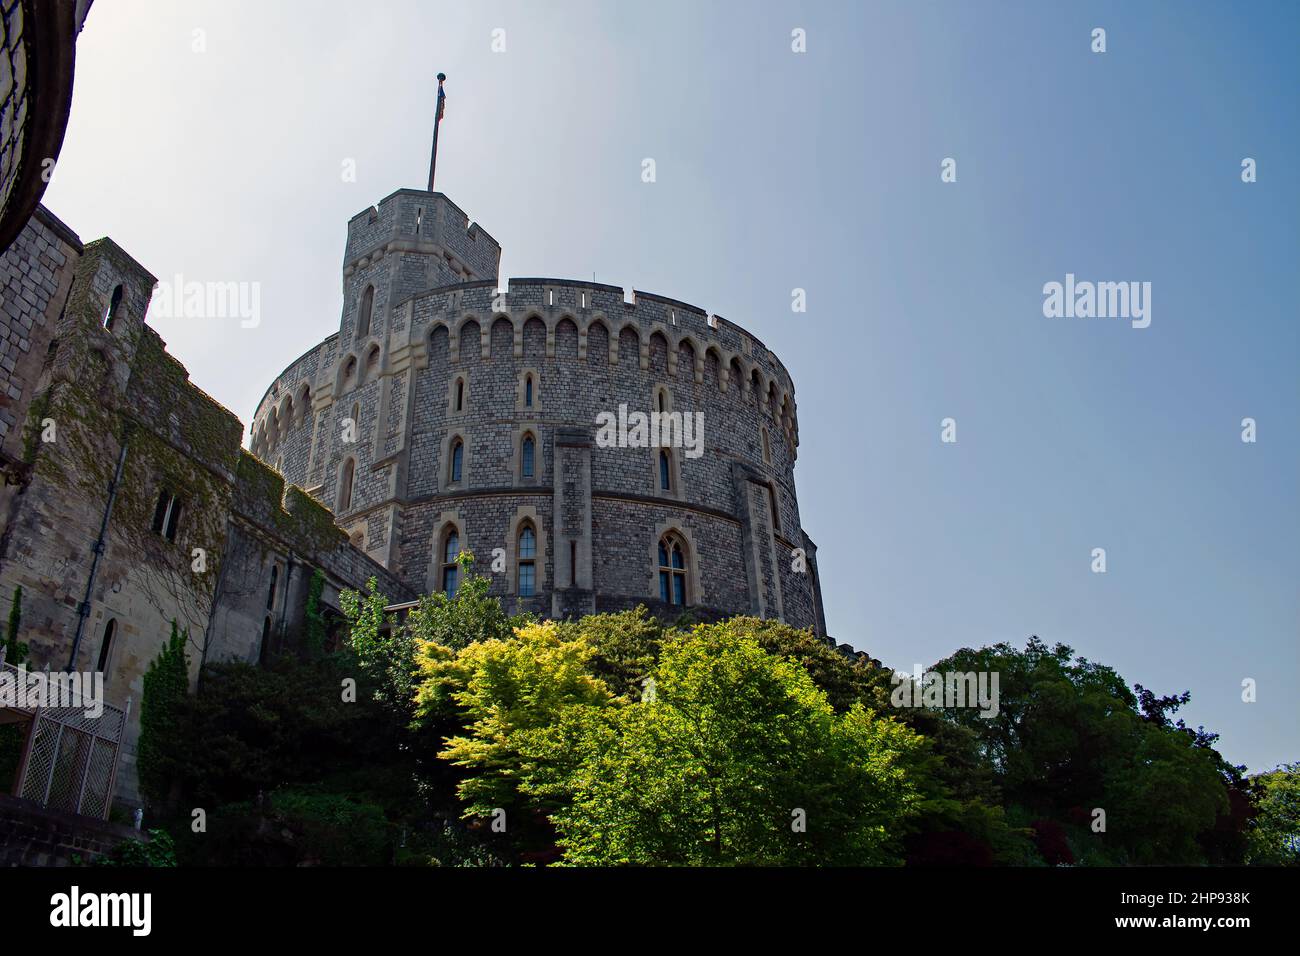 Looking upwards to the Round Tower of Windsor Castle.  A motte and bailey style fortification topped with a keep in Windsor, Berkshire, England. Stock Photo